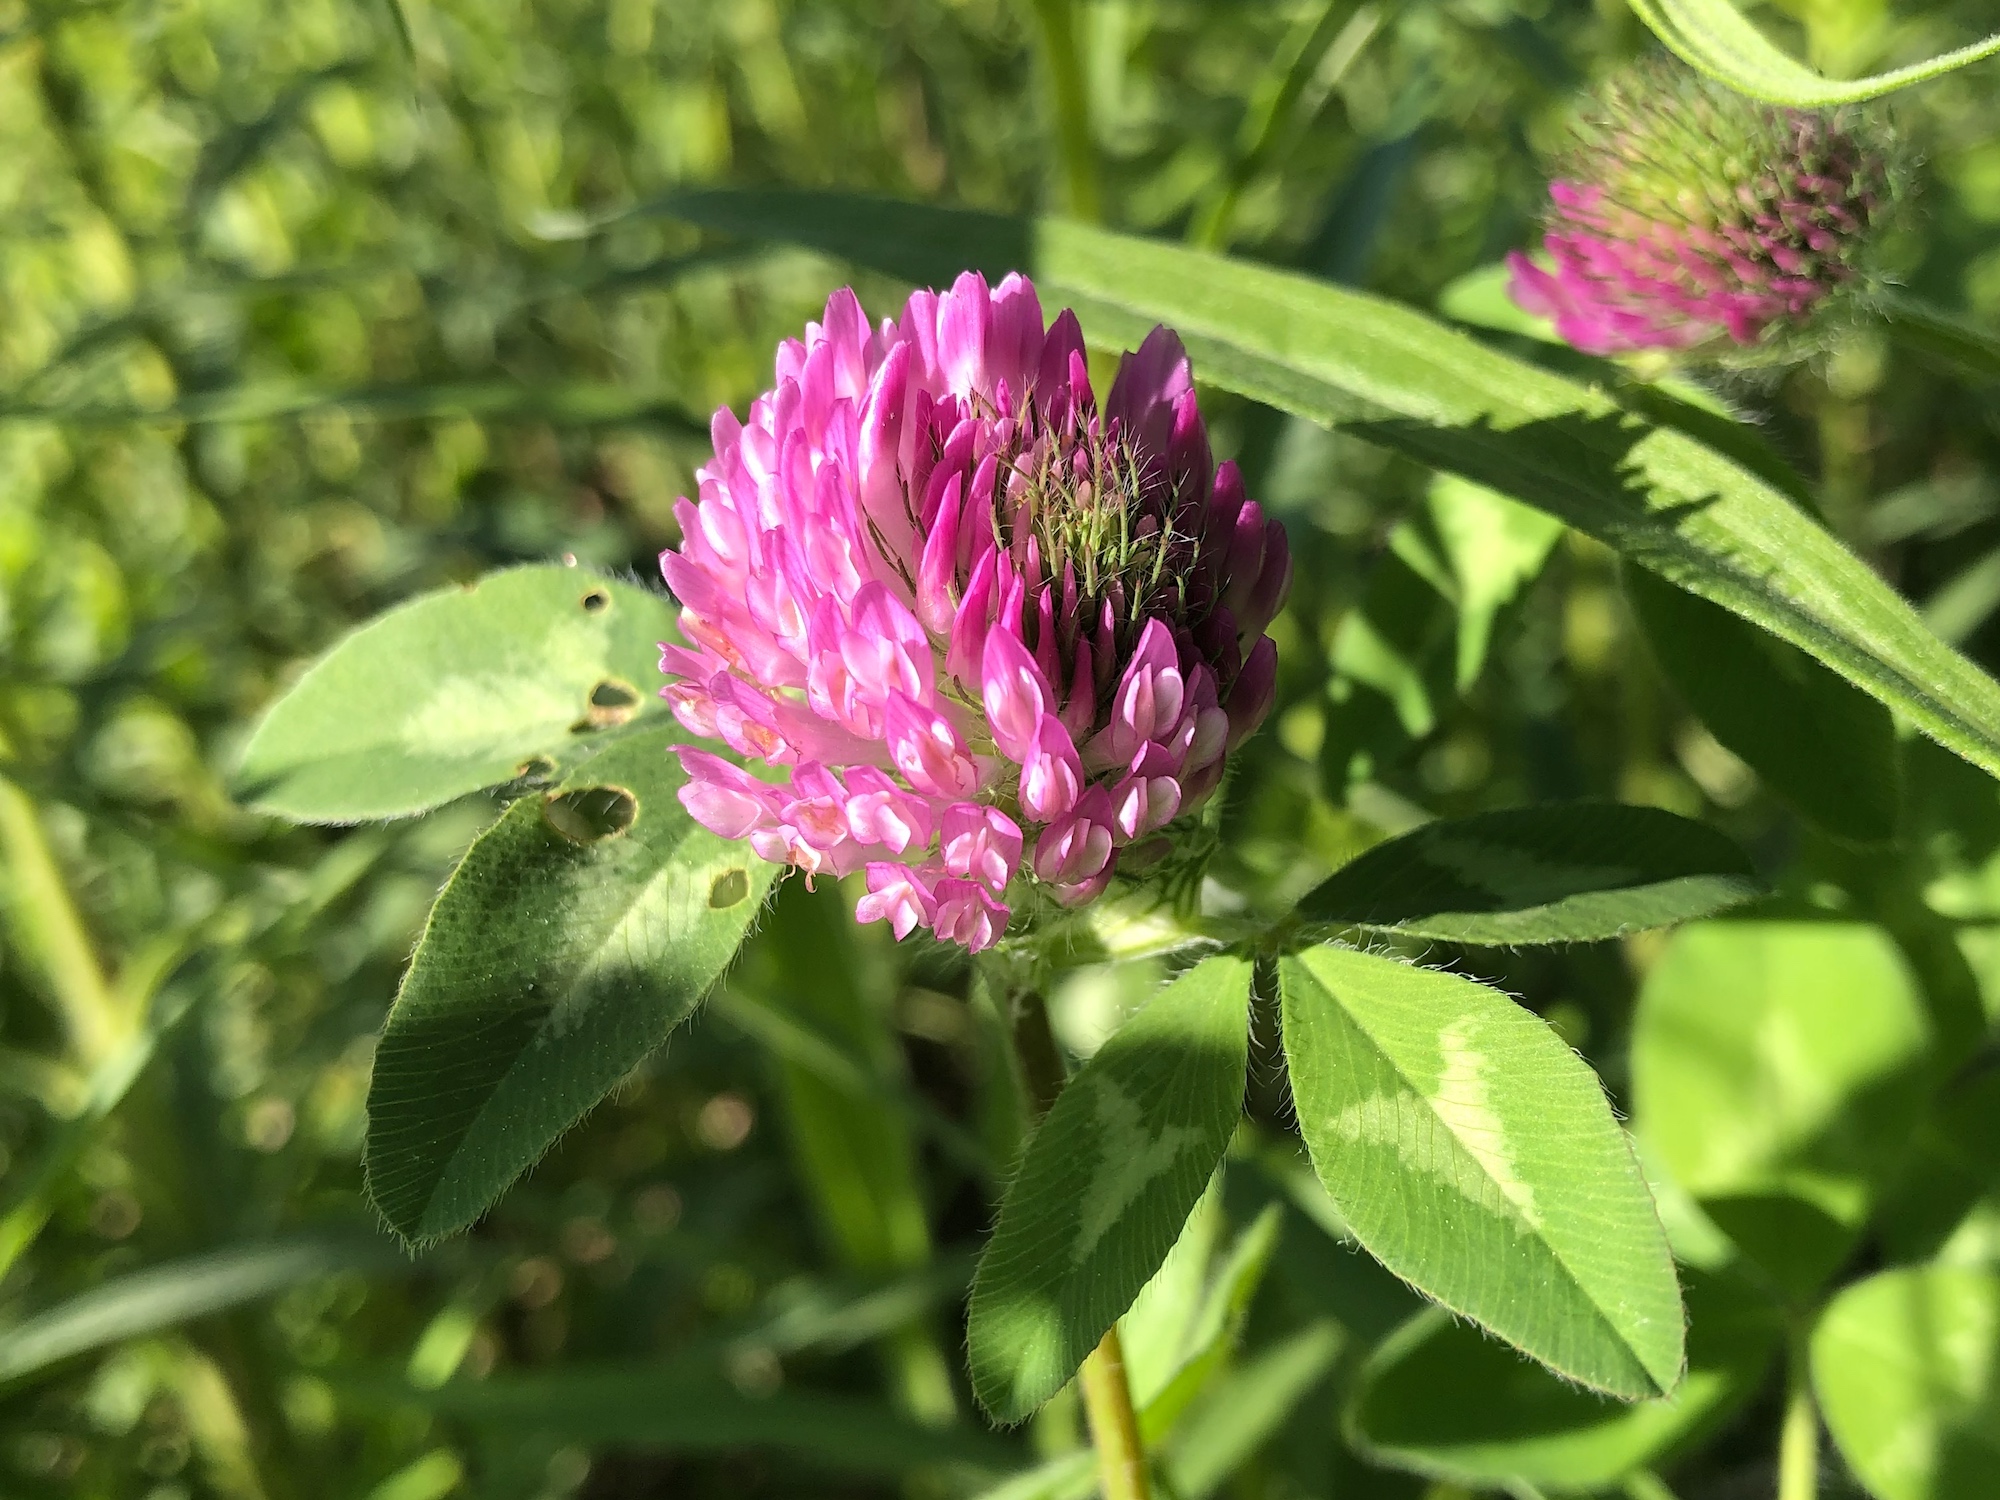 Red Clover on bank of retaining pond at the corner of Manitou Way and Nakoma Road in Madison, Wisconsinon May 30, 2020.